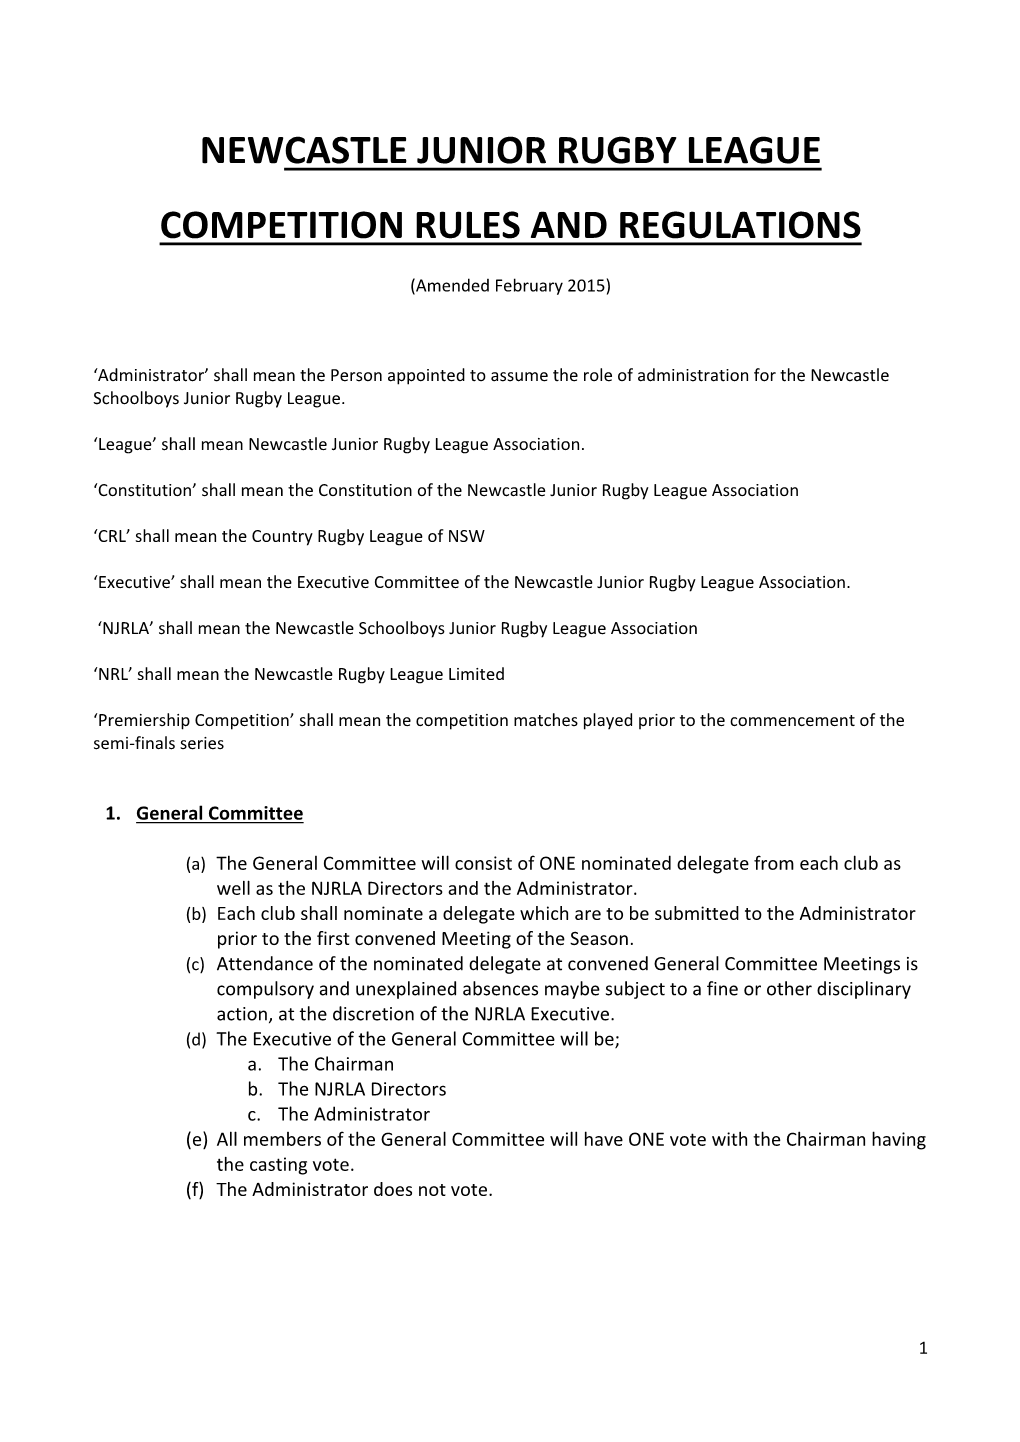 Newcastle Junior Rugby League Competition Rules and Regulations